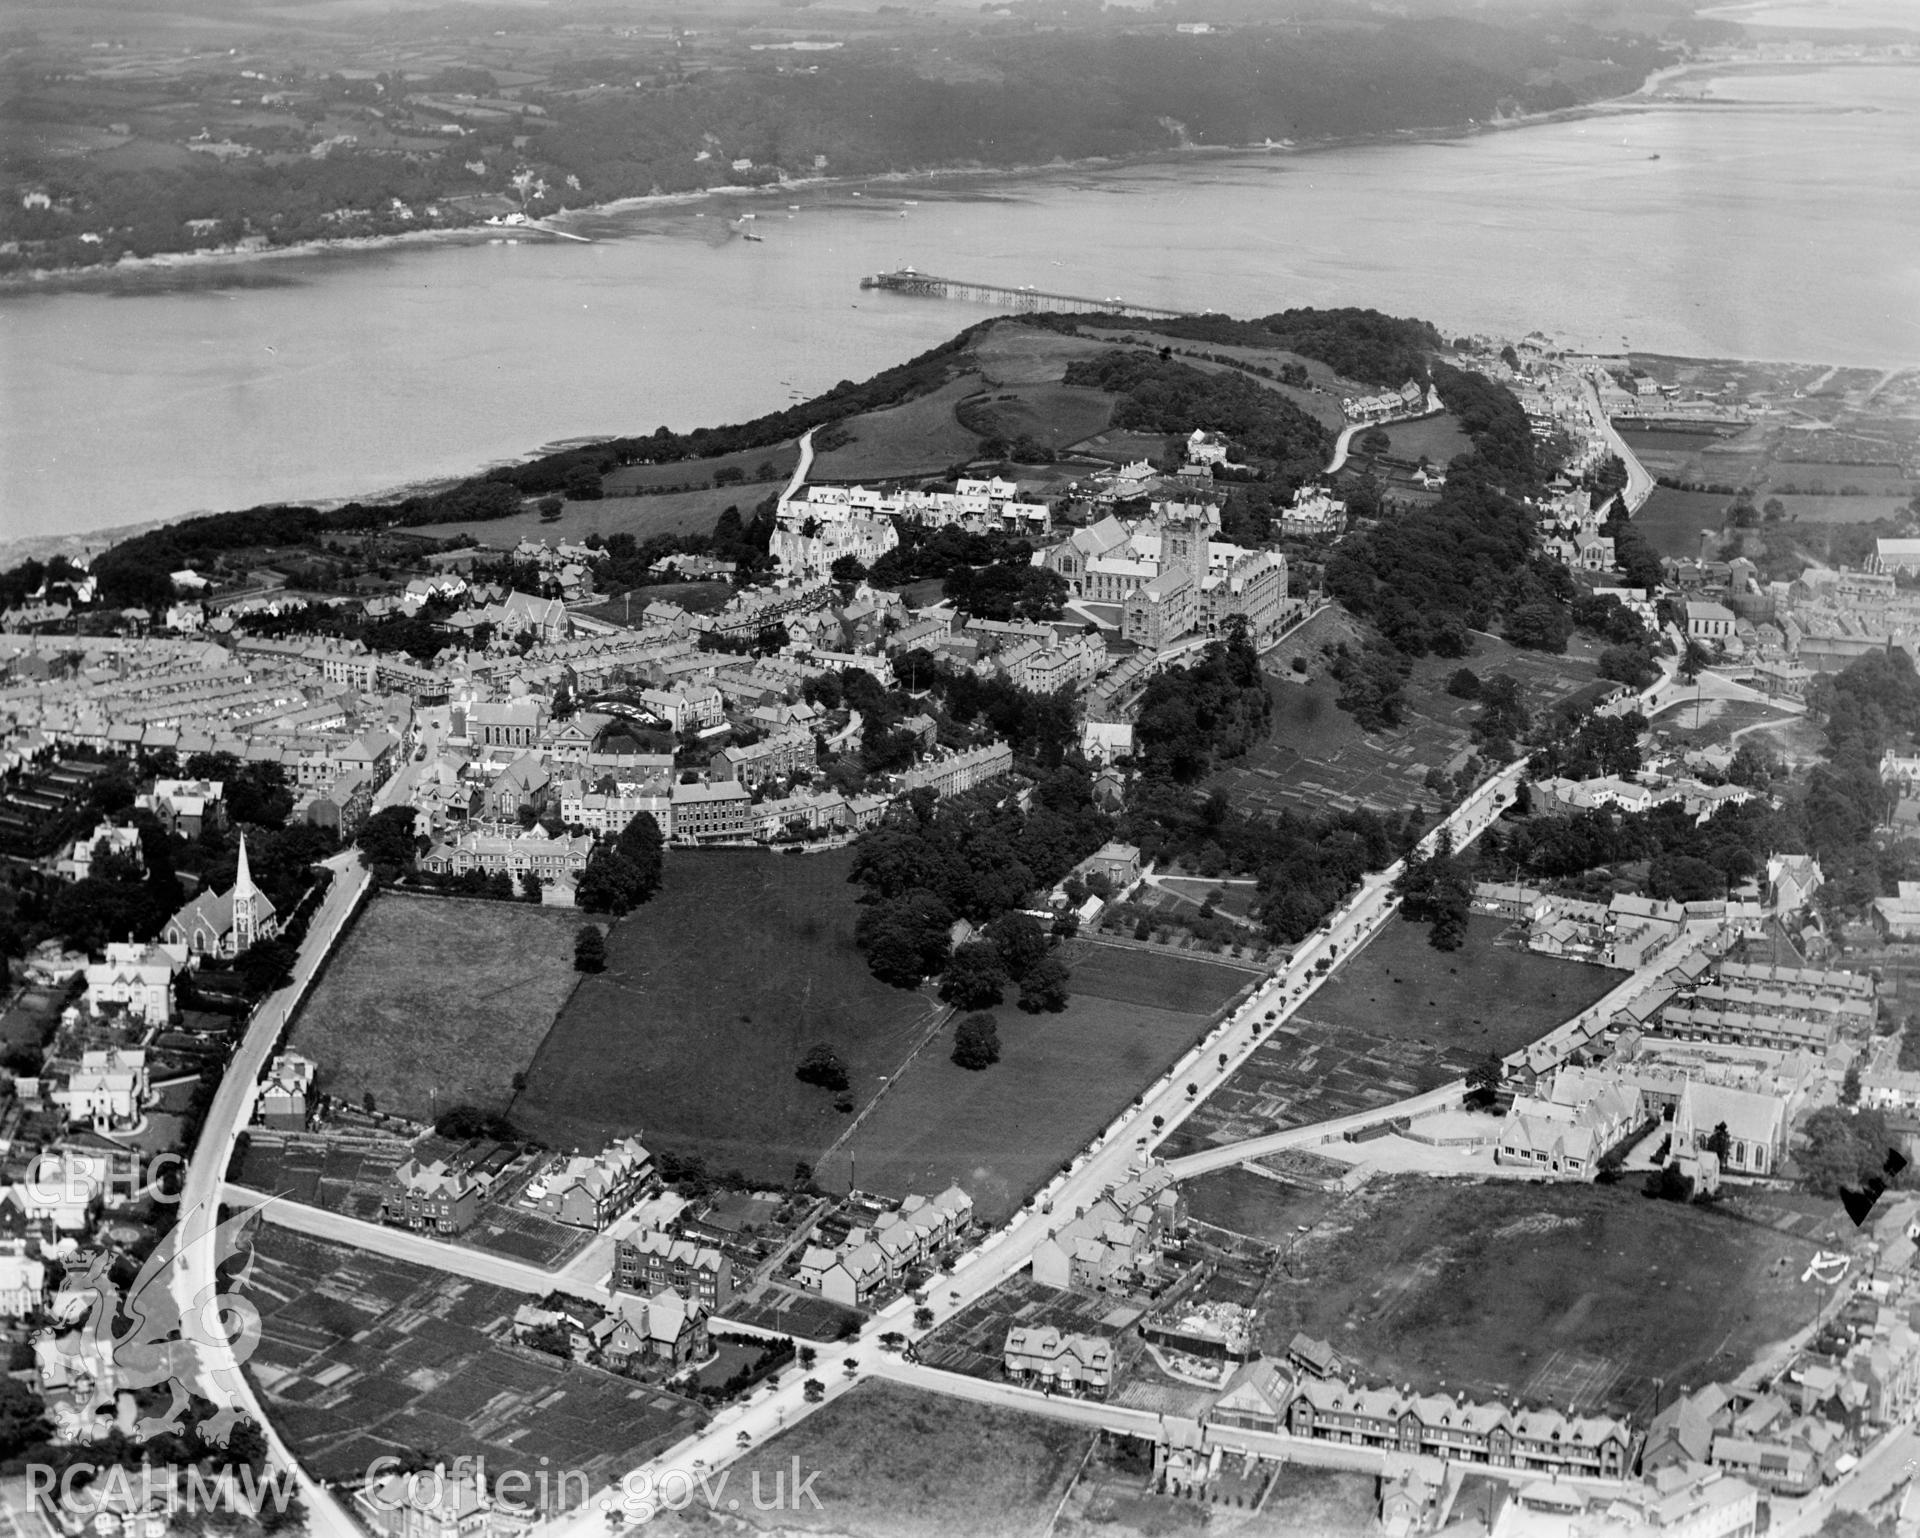 Distant view of Bangor, oblique aerial view. 5?x4? black and white glass plate negative.